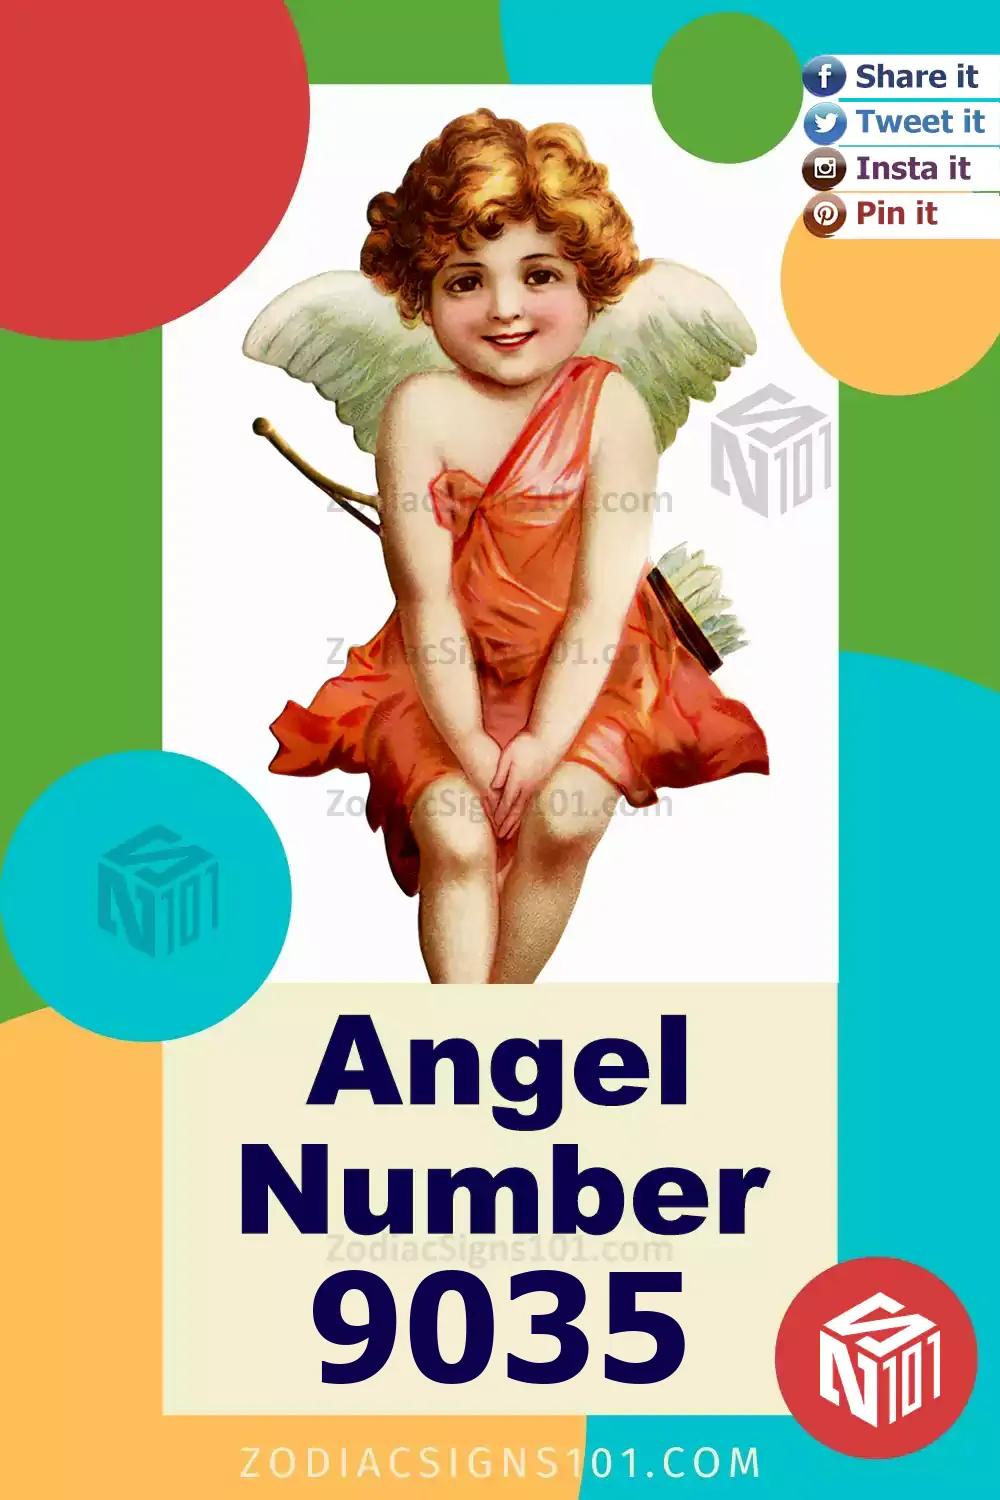 9035 Angel Number Meaning